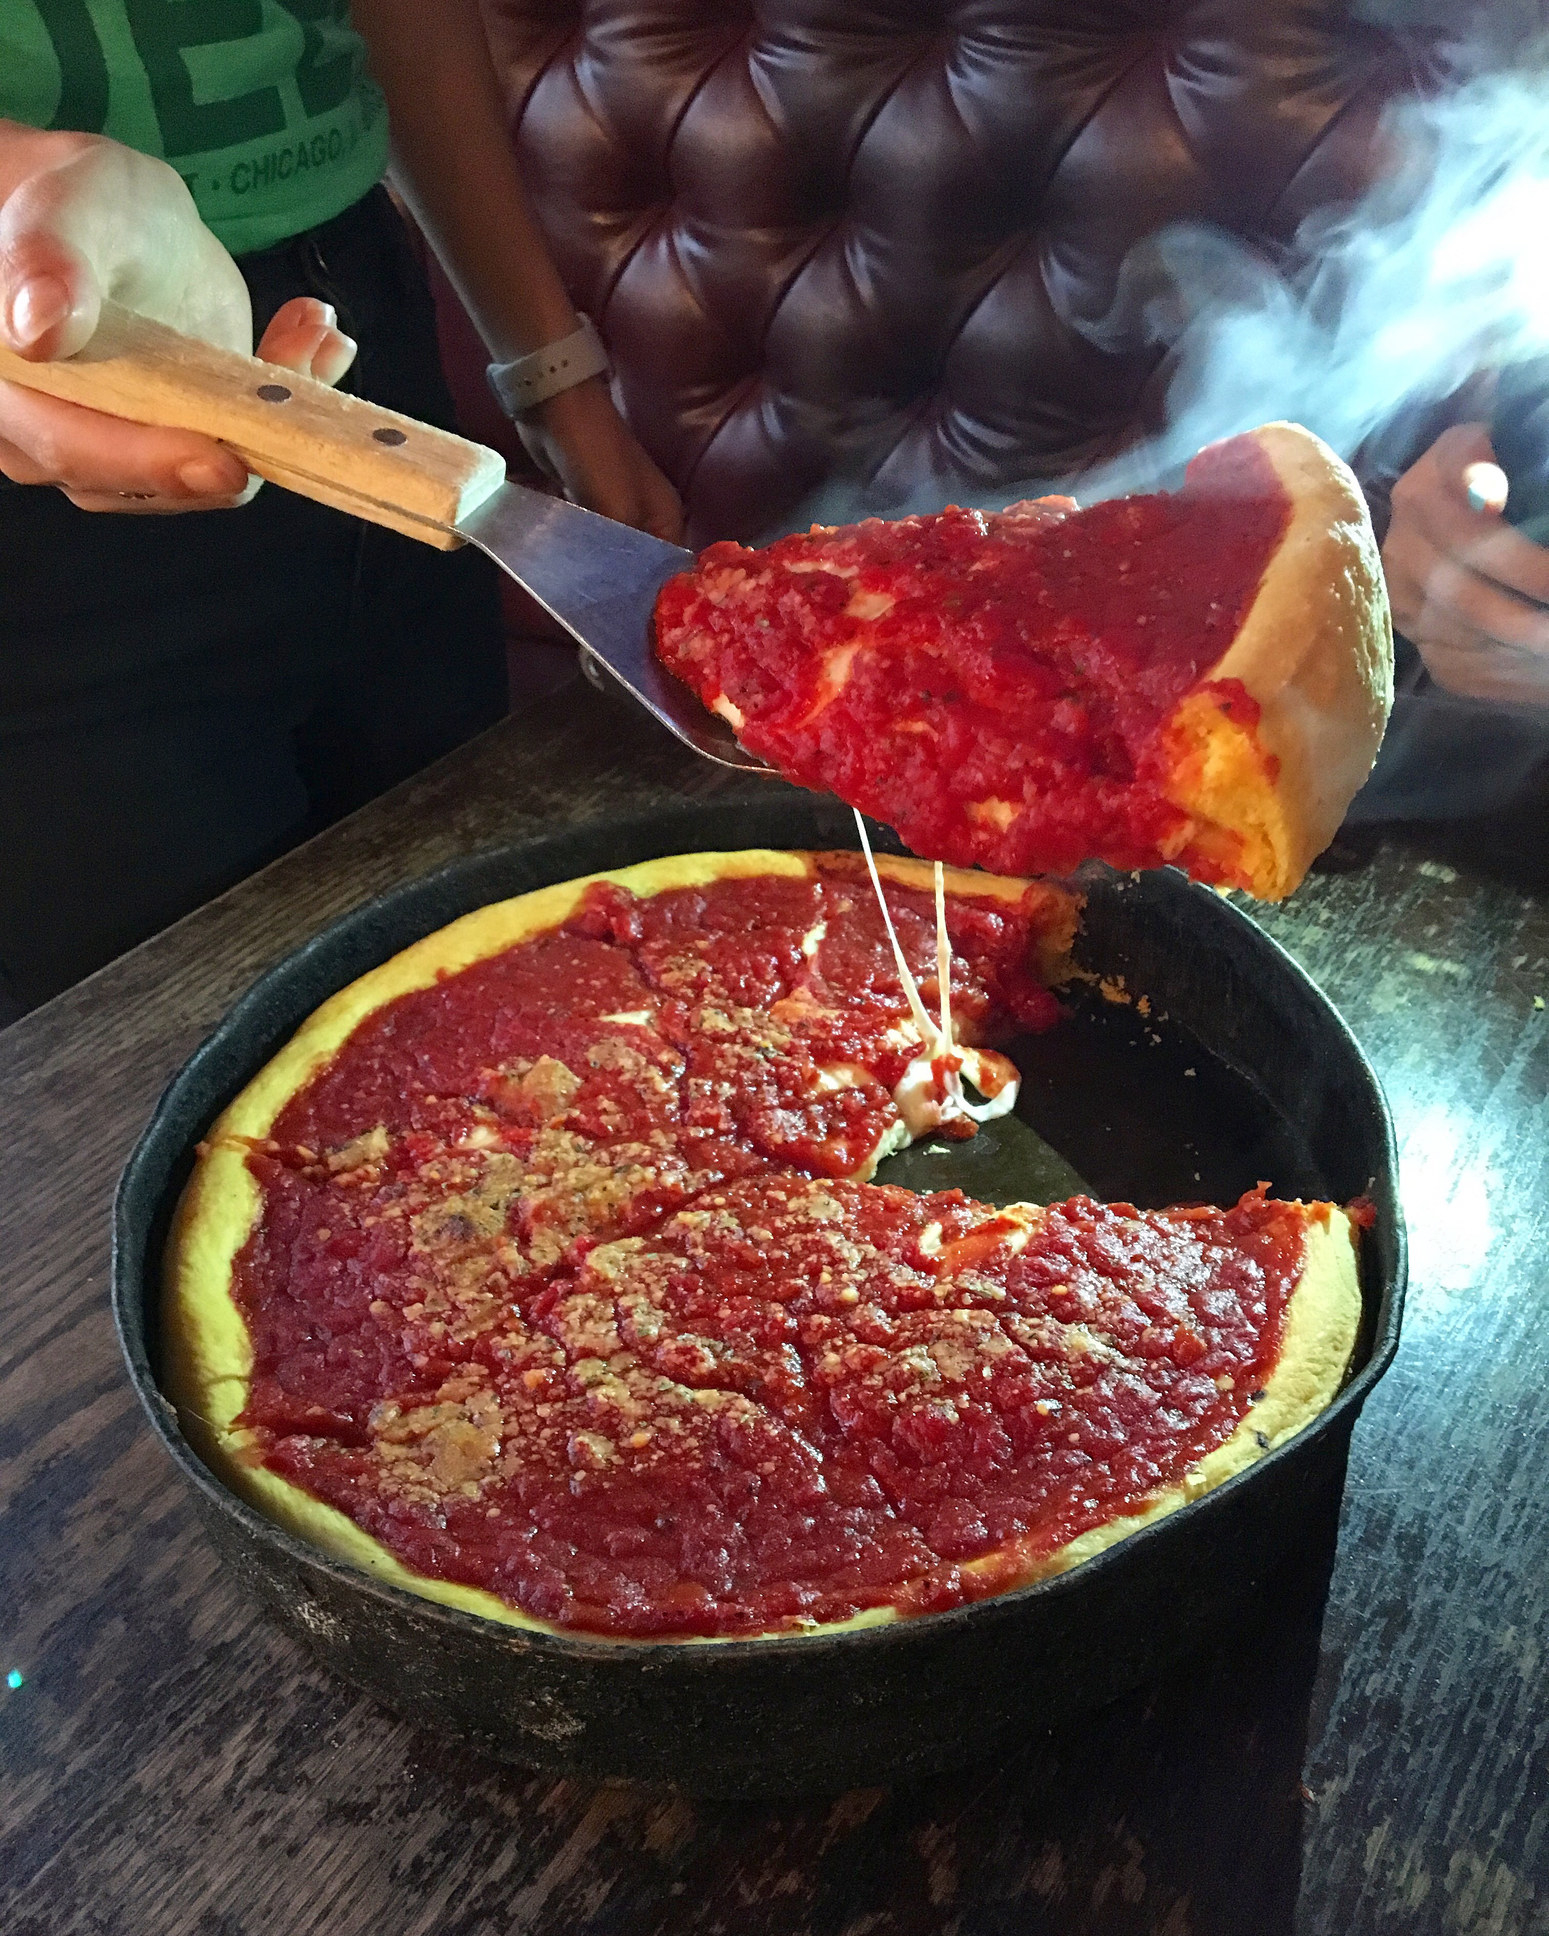 Taking a slice of deep dish pizza from the pan